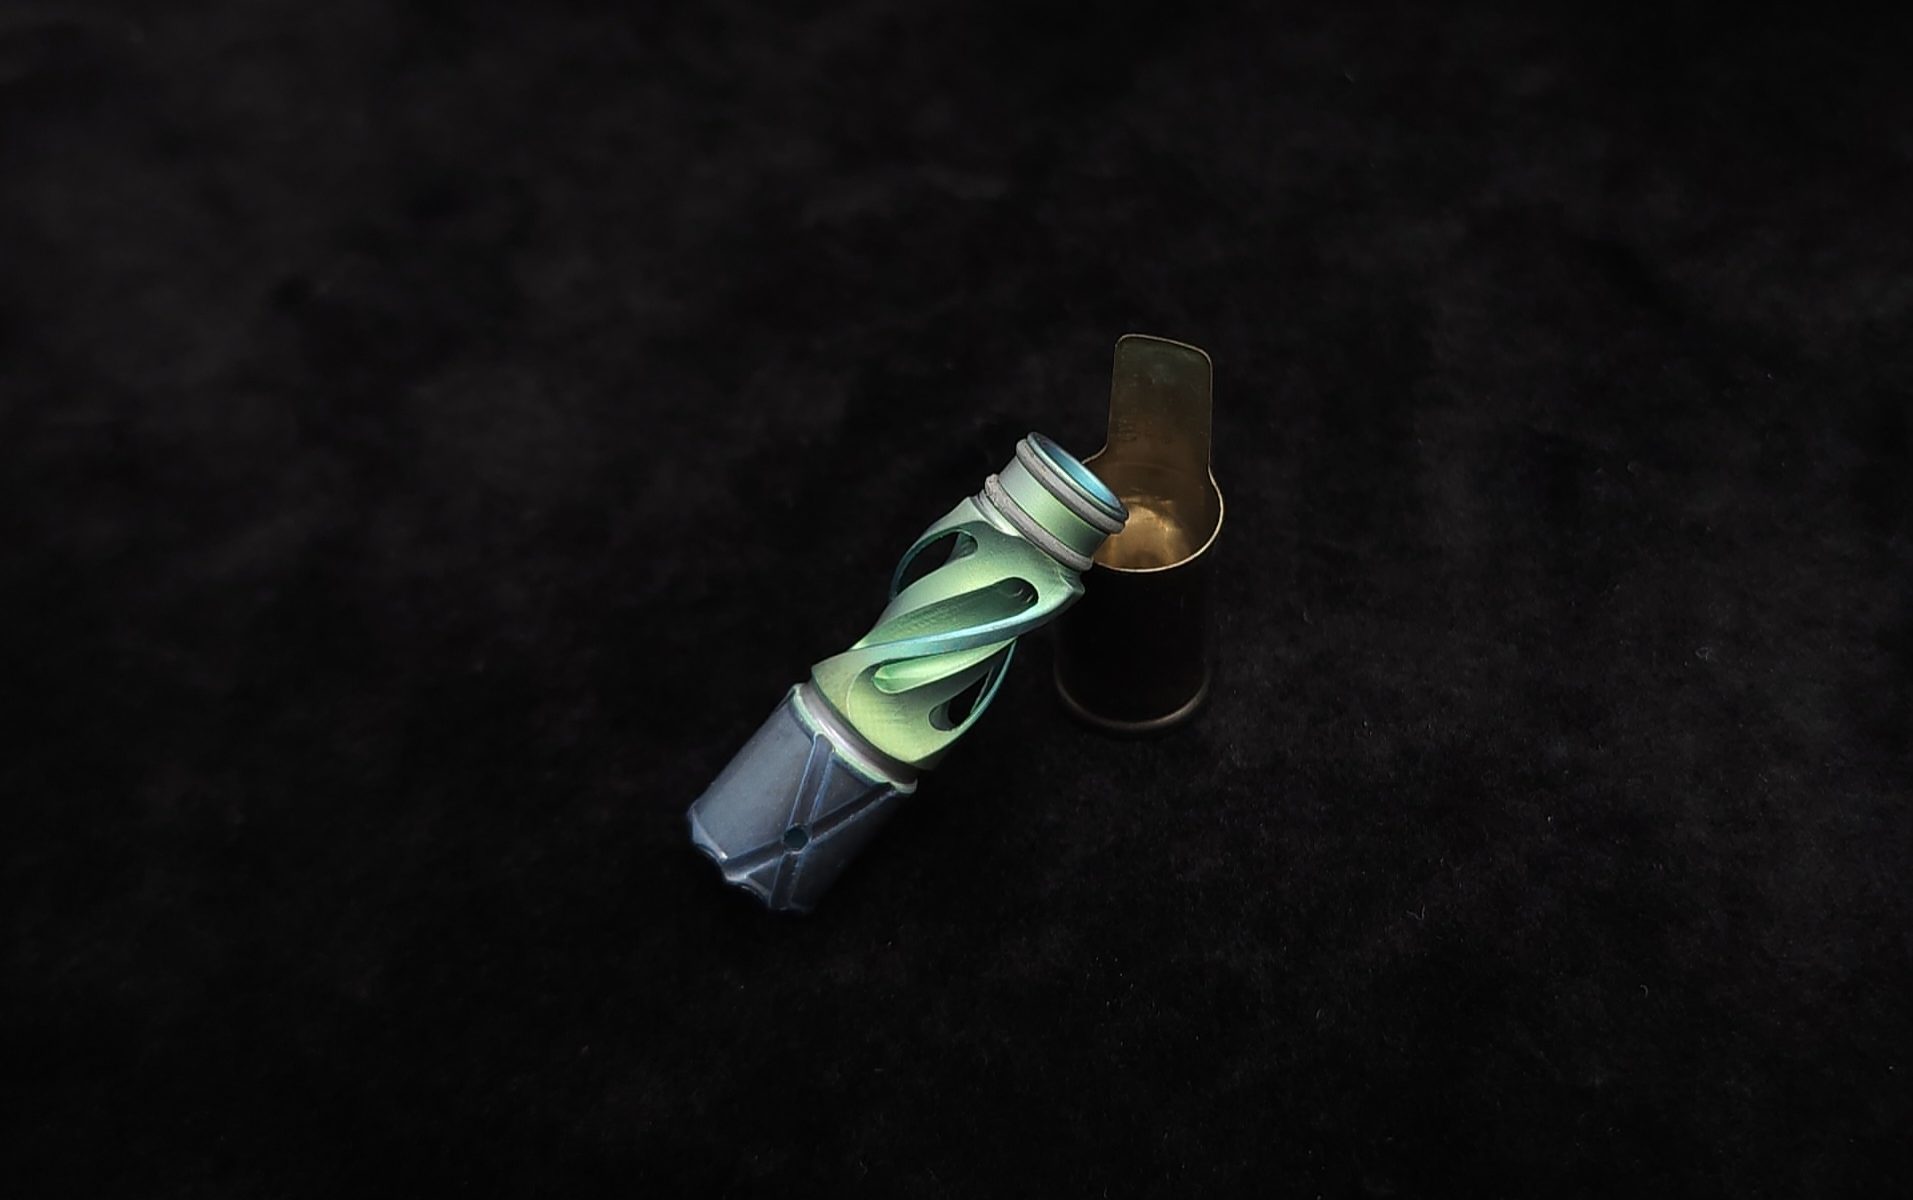 This image portrays TITANIUM TIP: HELIX-Green/Blue Anodized by Dovetail Woodwork.